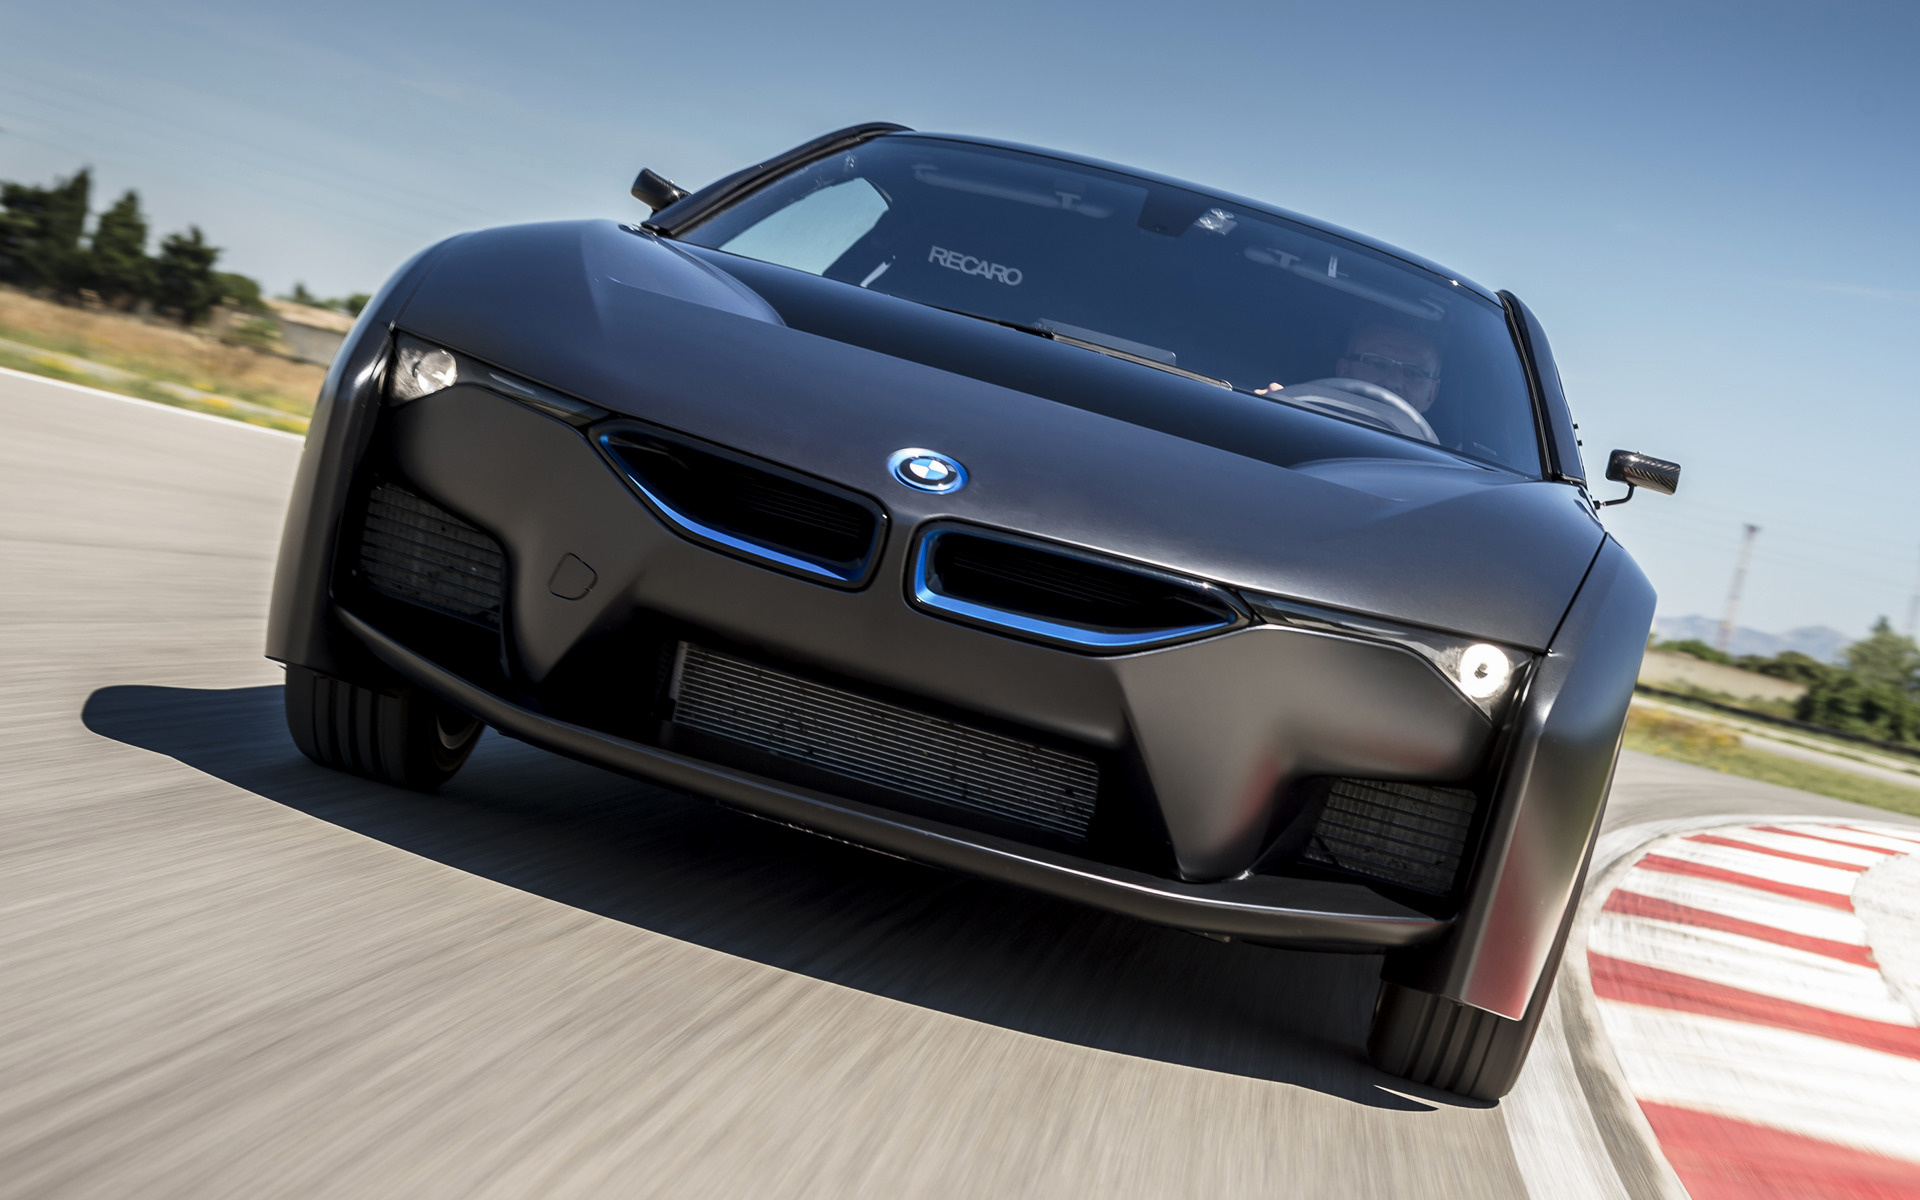 BMW i8 Hydrogen Fuel Cell eDrive Prototype (2015) Wallpapers and HD